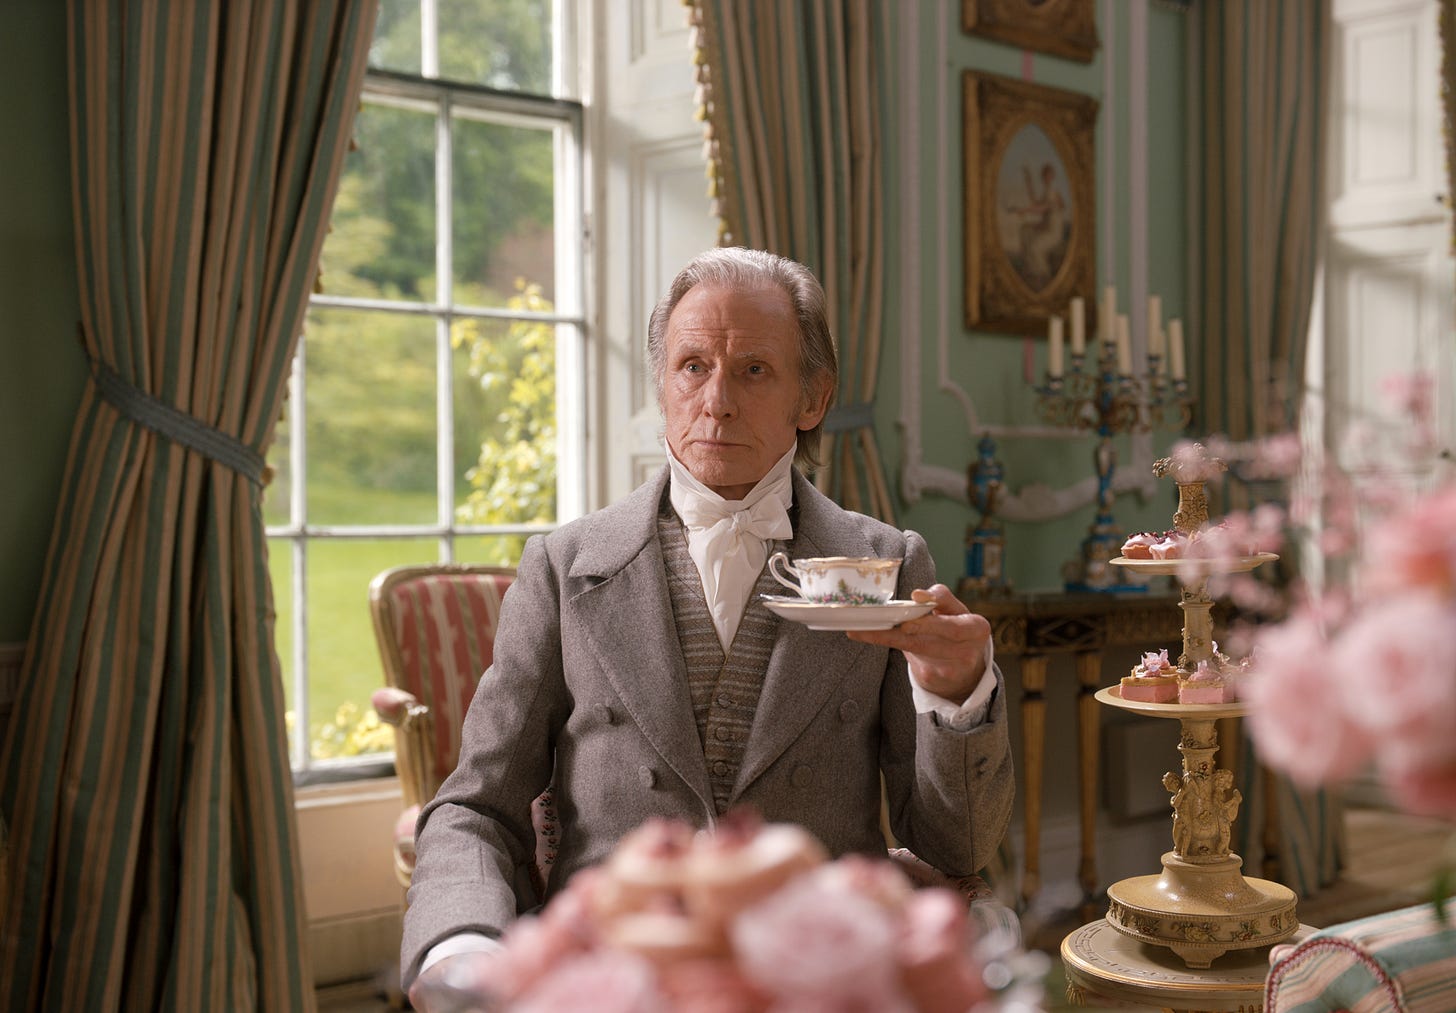 Bill Nighy as Mr. Woodhouse sits upright in a drawing room, holding a cup of tea and maintaining a look of consternation. The photo is from the 2020 Autumn de Wilde adaptation of Jane Austen's 'Emma'. 